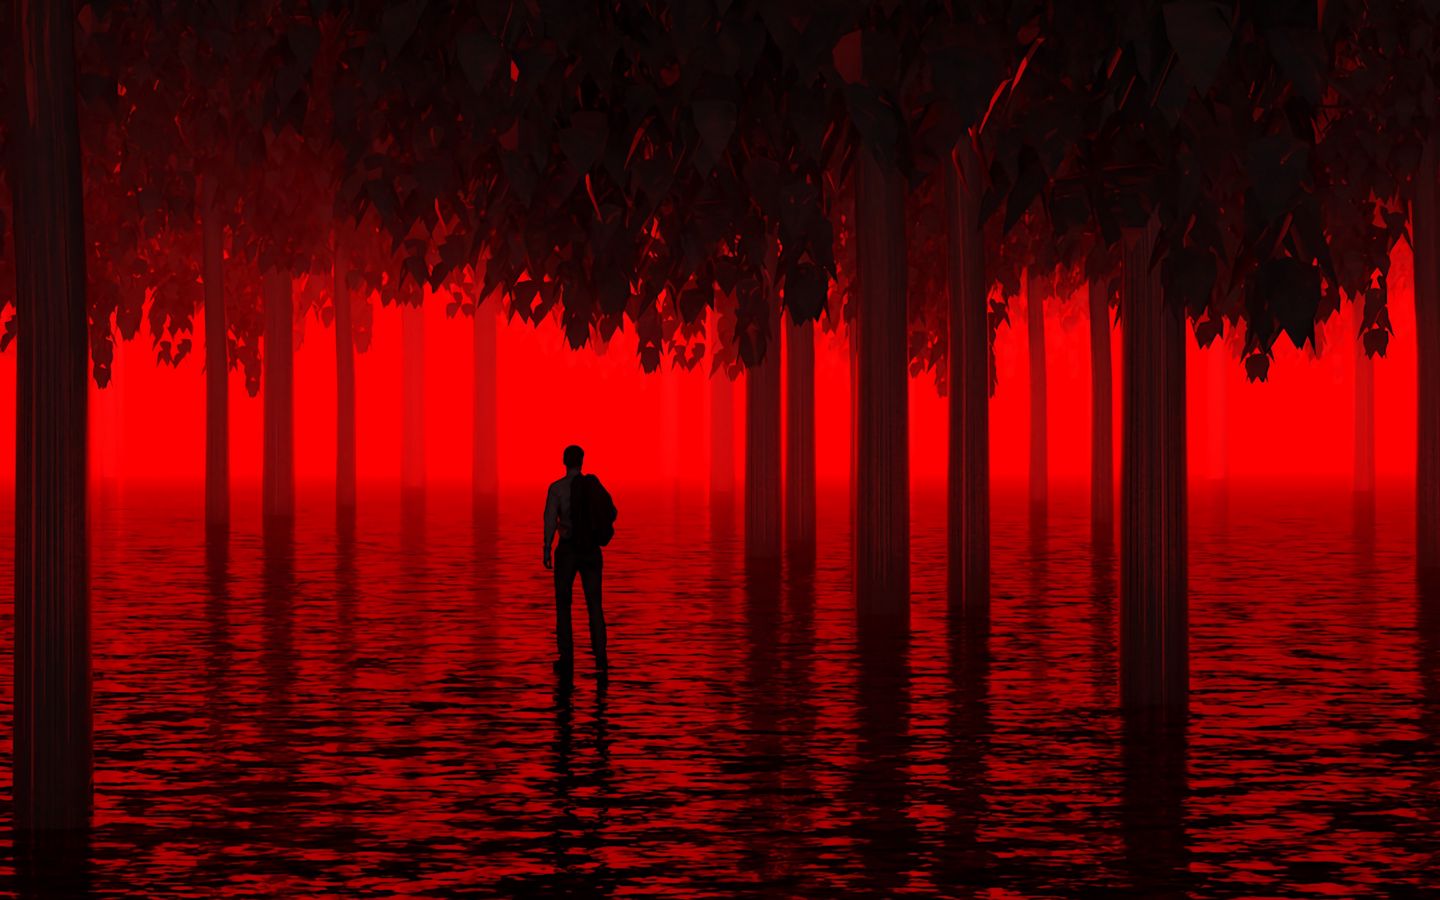 Download wallpaper 1440x900 water, trees, man, red, neon, light, flooded widescreen 16:10 HD background